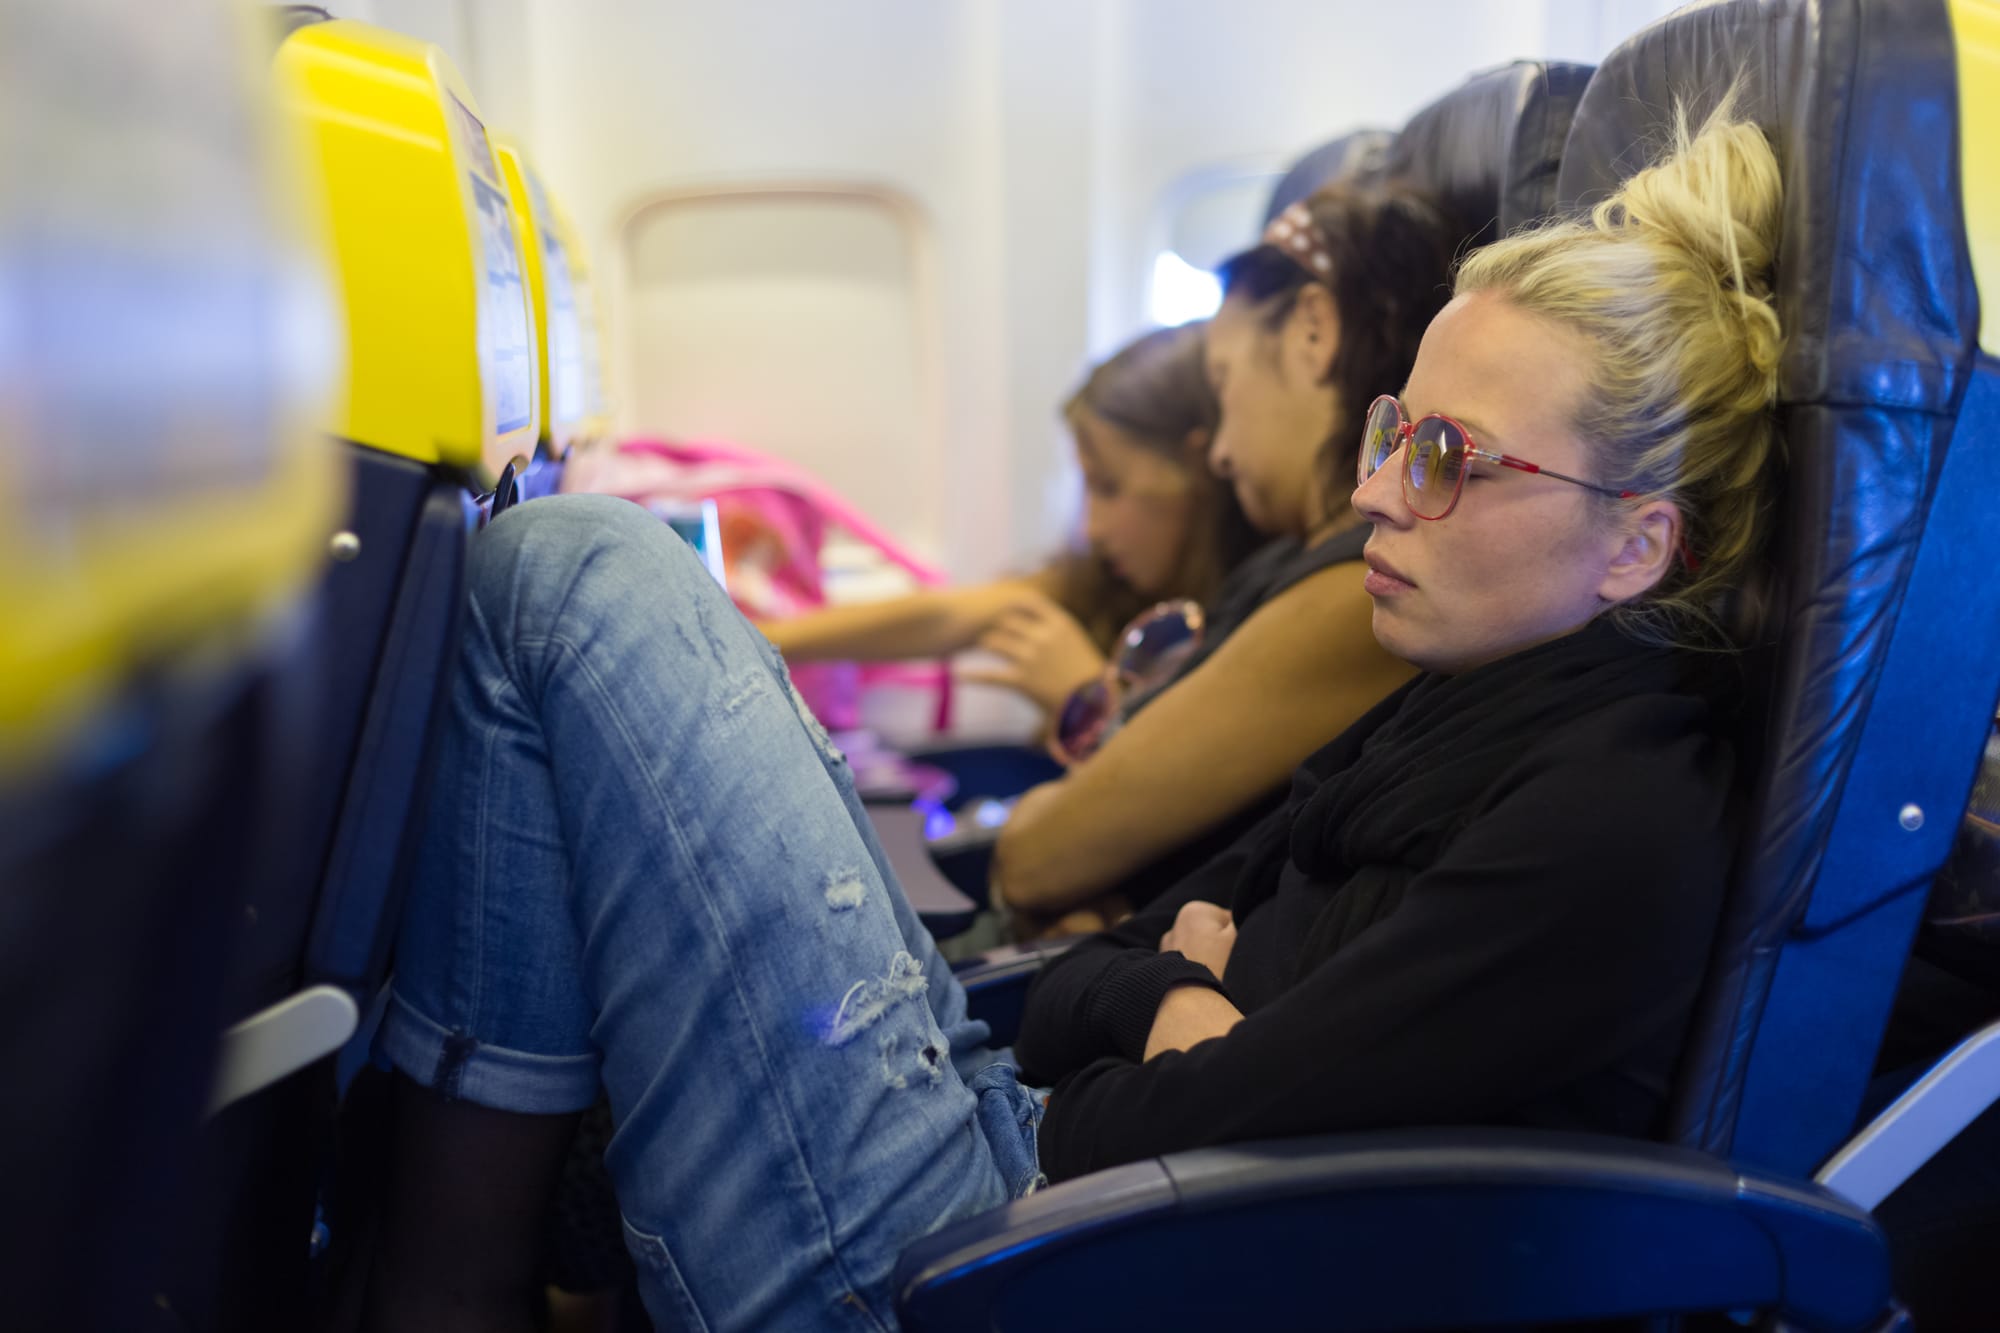 Disadvantages Of Budget Airlines - Uncomfortable and Cramped Seats